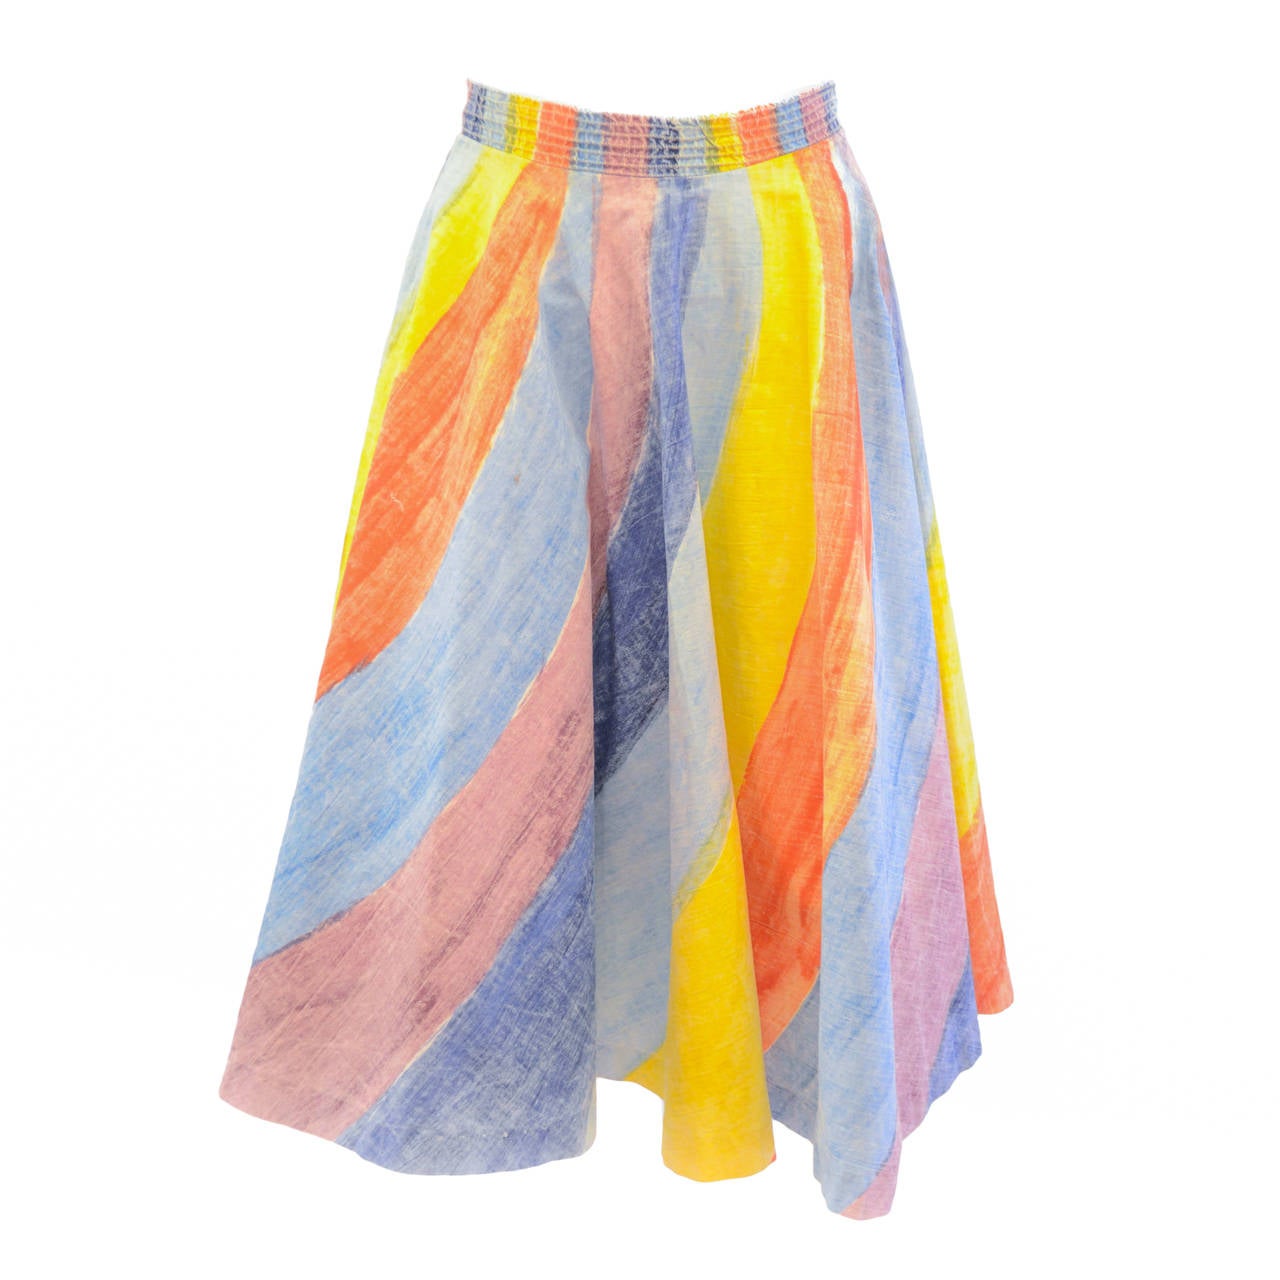 EMILIO PUCCI
Rare Early 1950's 'Emilio' Skirt.  Emilio Pucci opened his Capri location in 1949. At that time, he used his first name,  Emilio; the aristocracy considered it shameful to associate the family name with trade - no matter how exclusive!